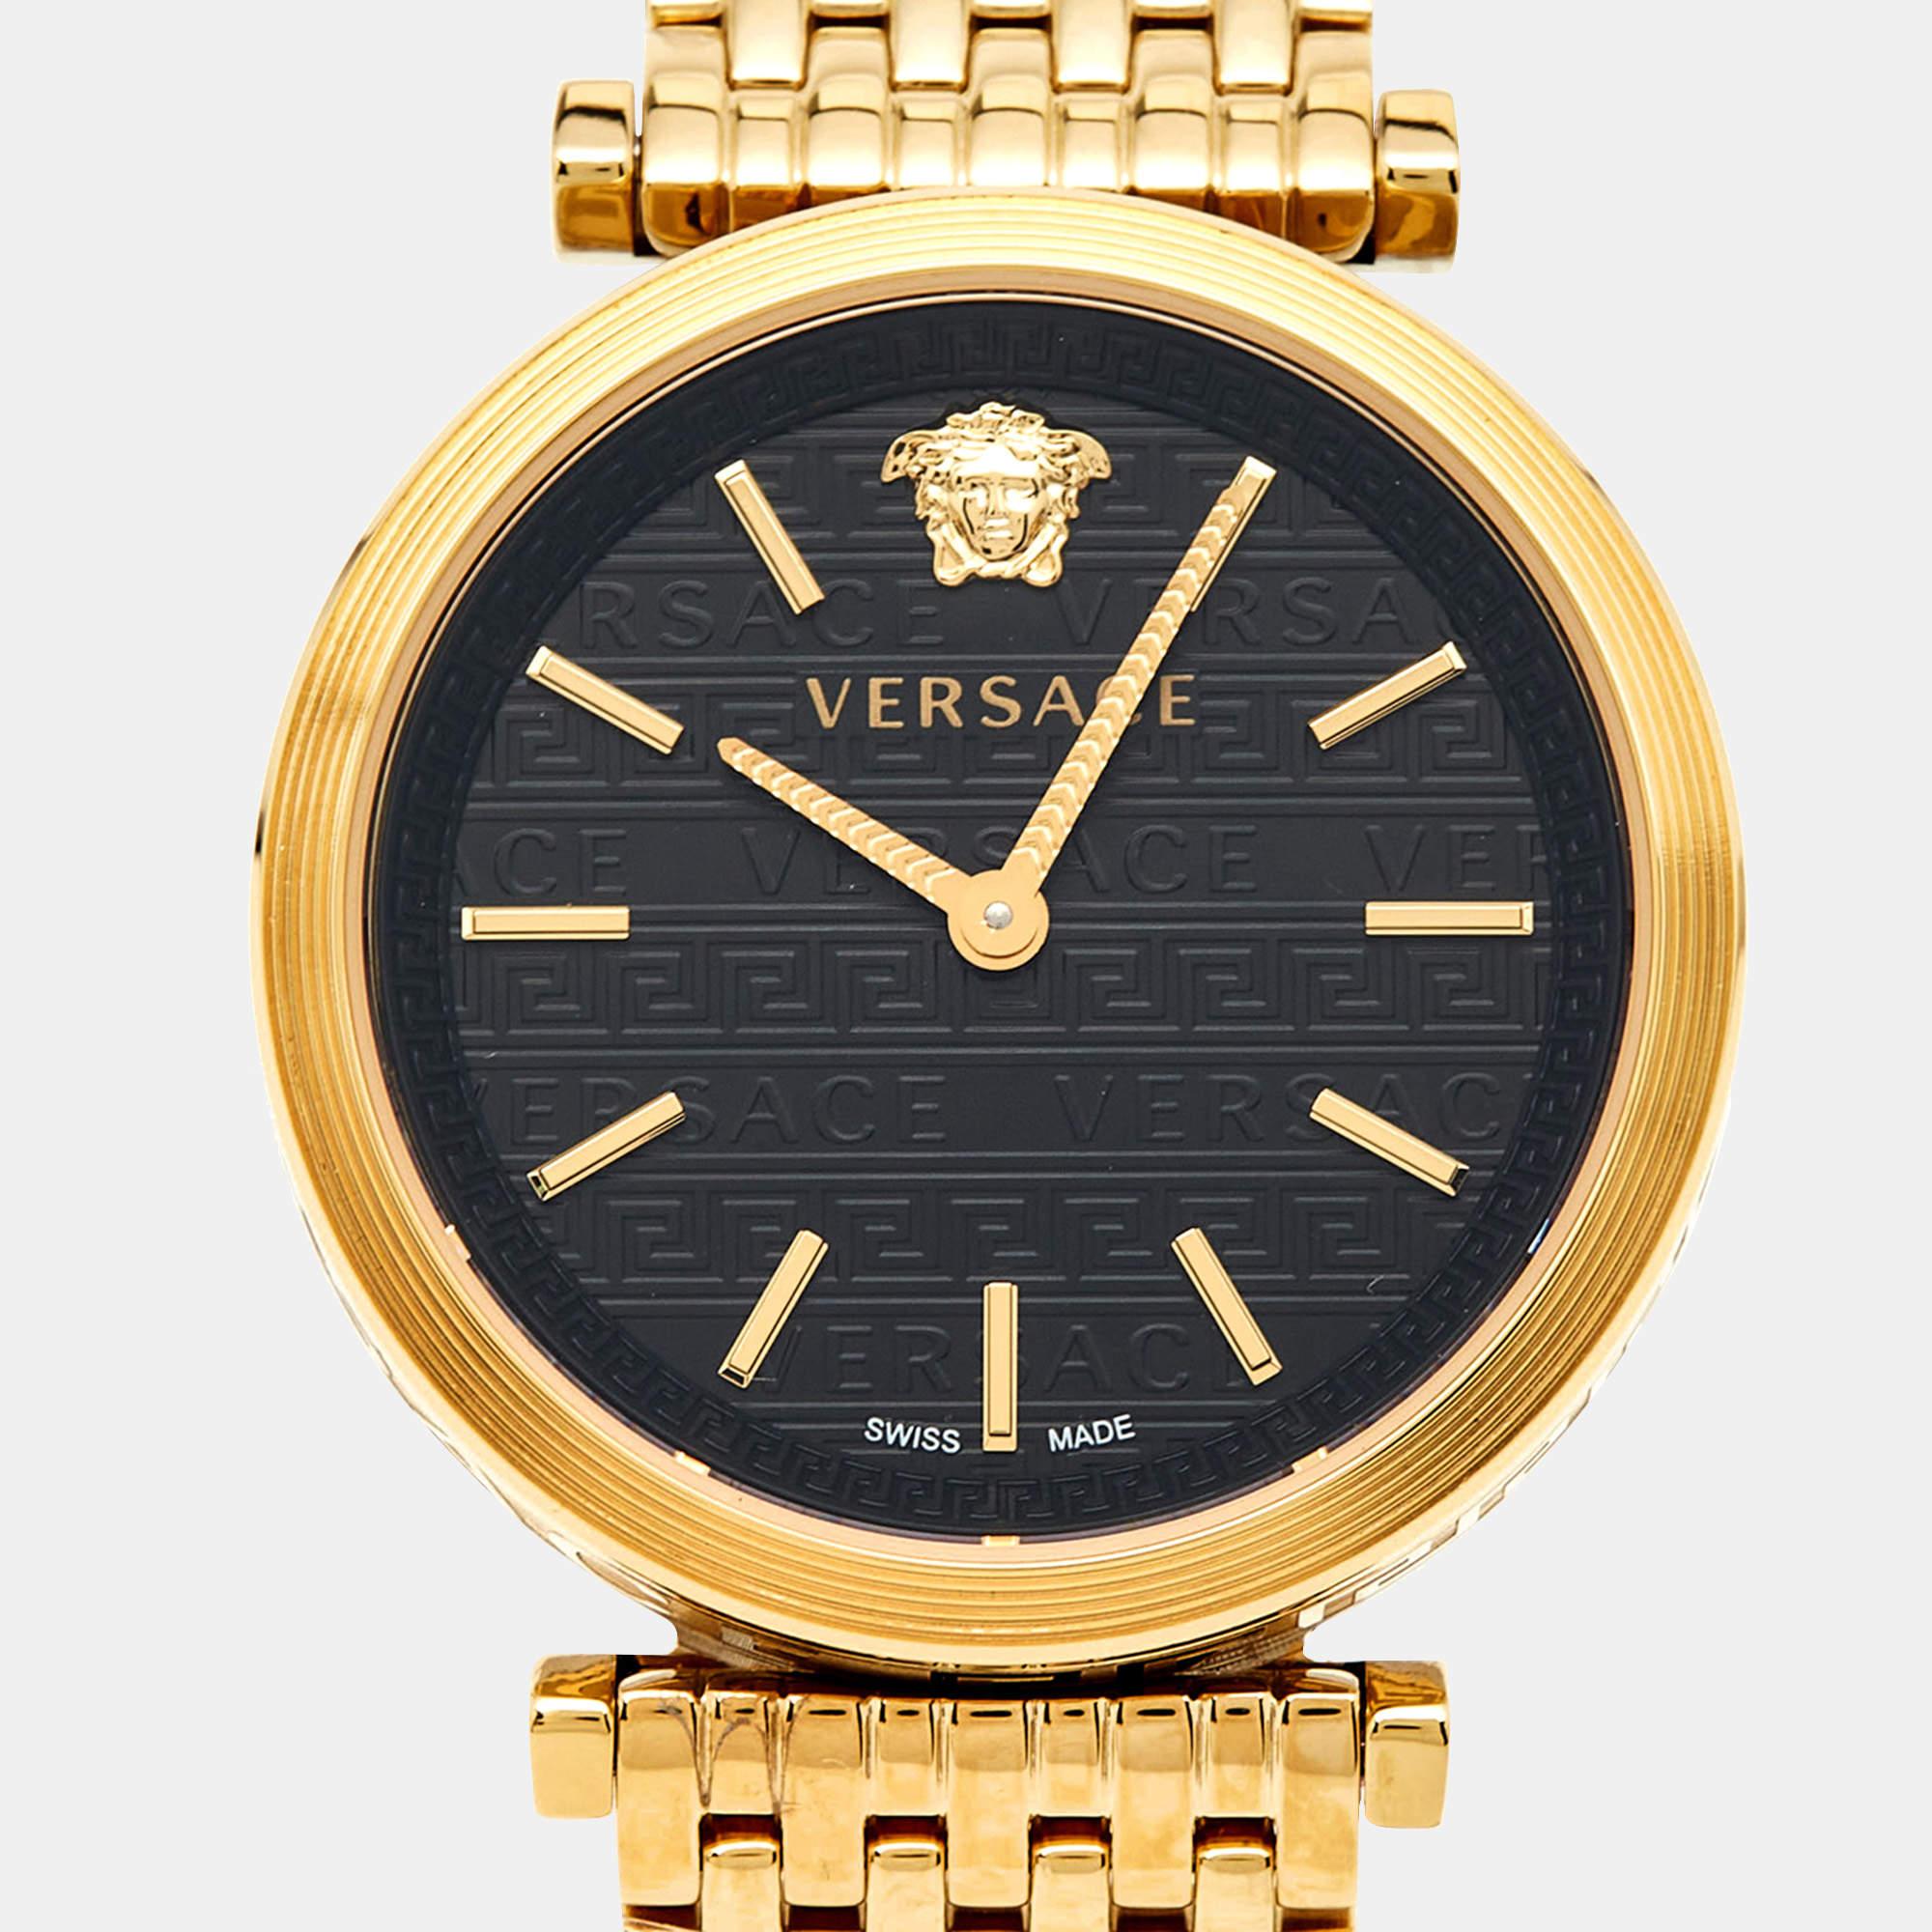 Crafted with precision, the Versace V-Twist VELS00819 wristwatch exudes sophistication and style. Its sleek black dial, adorned with the iconic Versace motif, is encased in luxurious gold-plated stainless steel. Combining elegance with